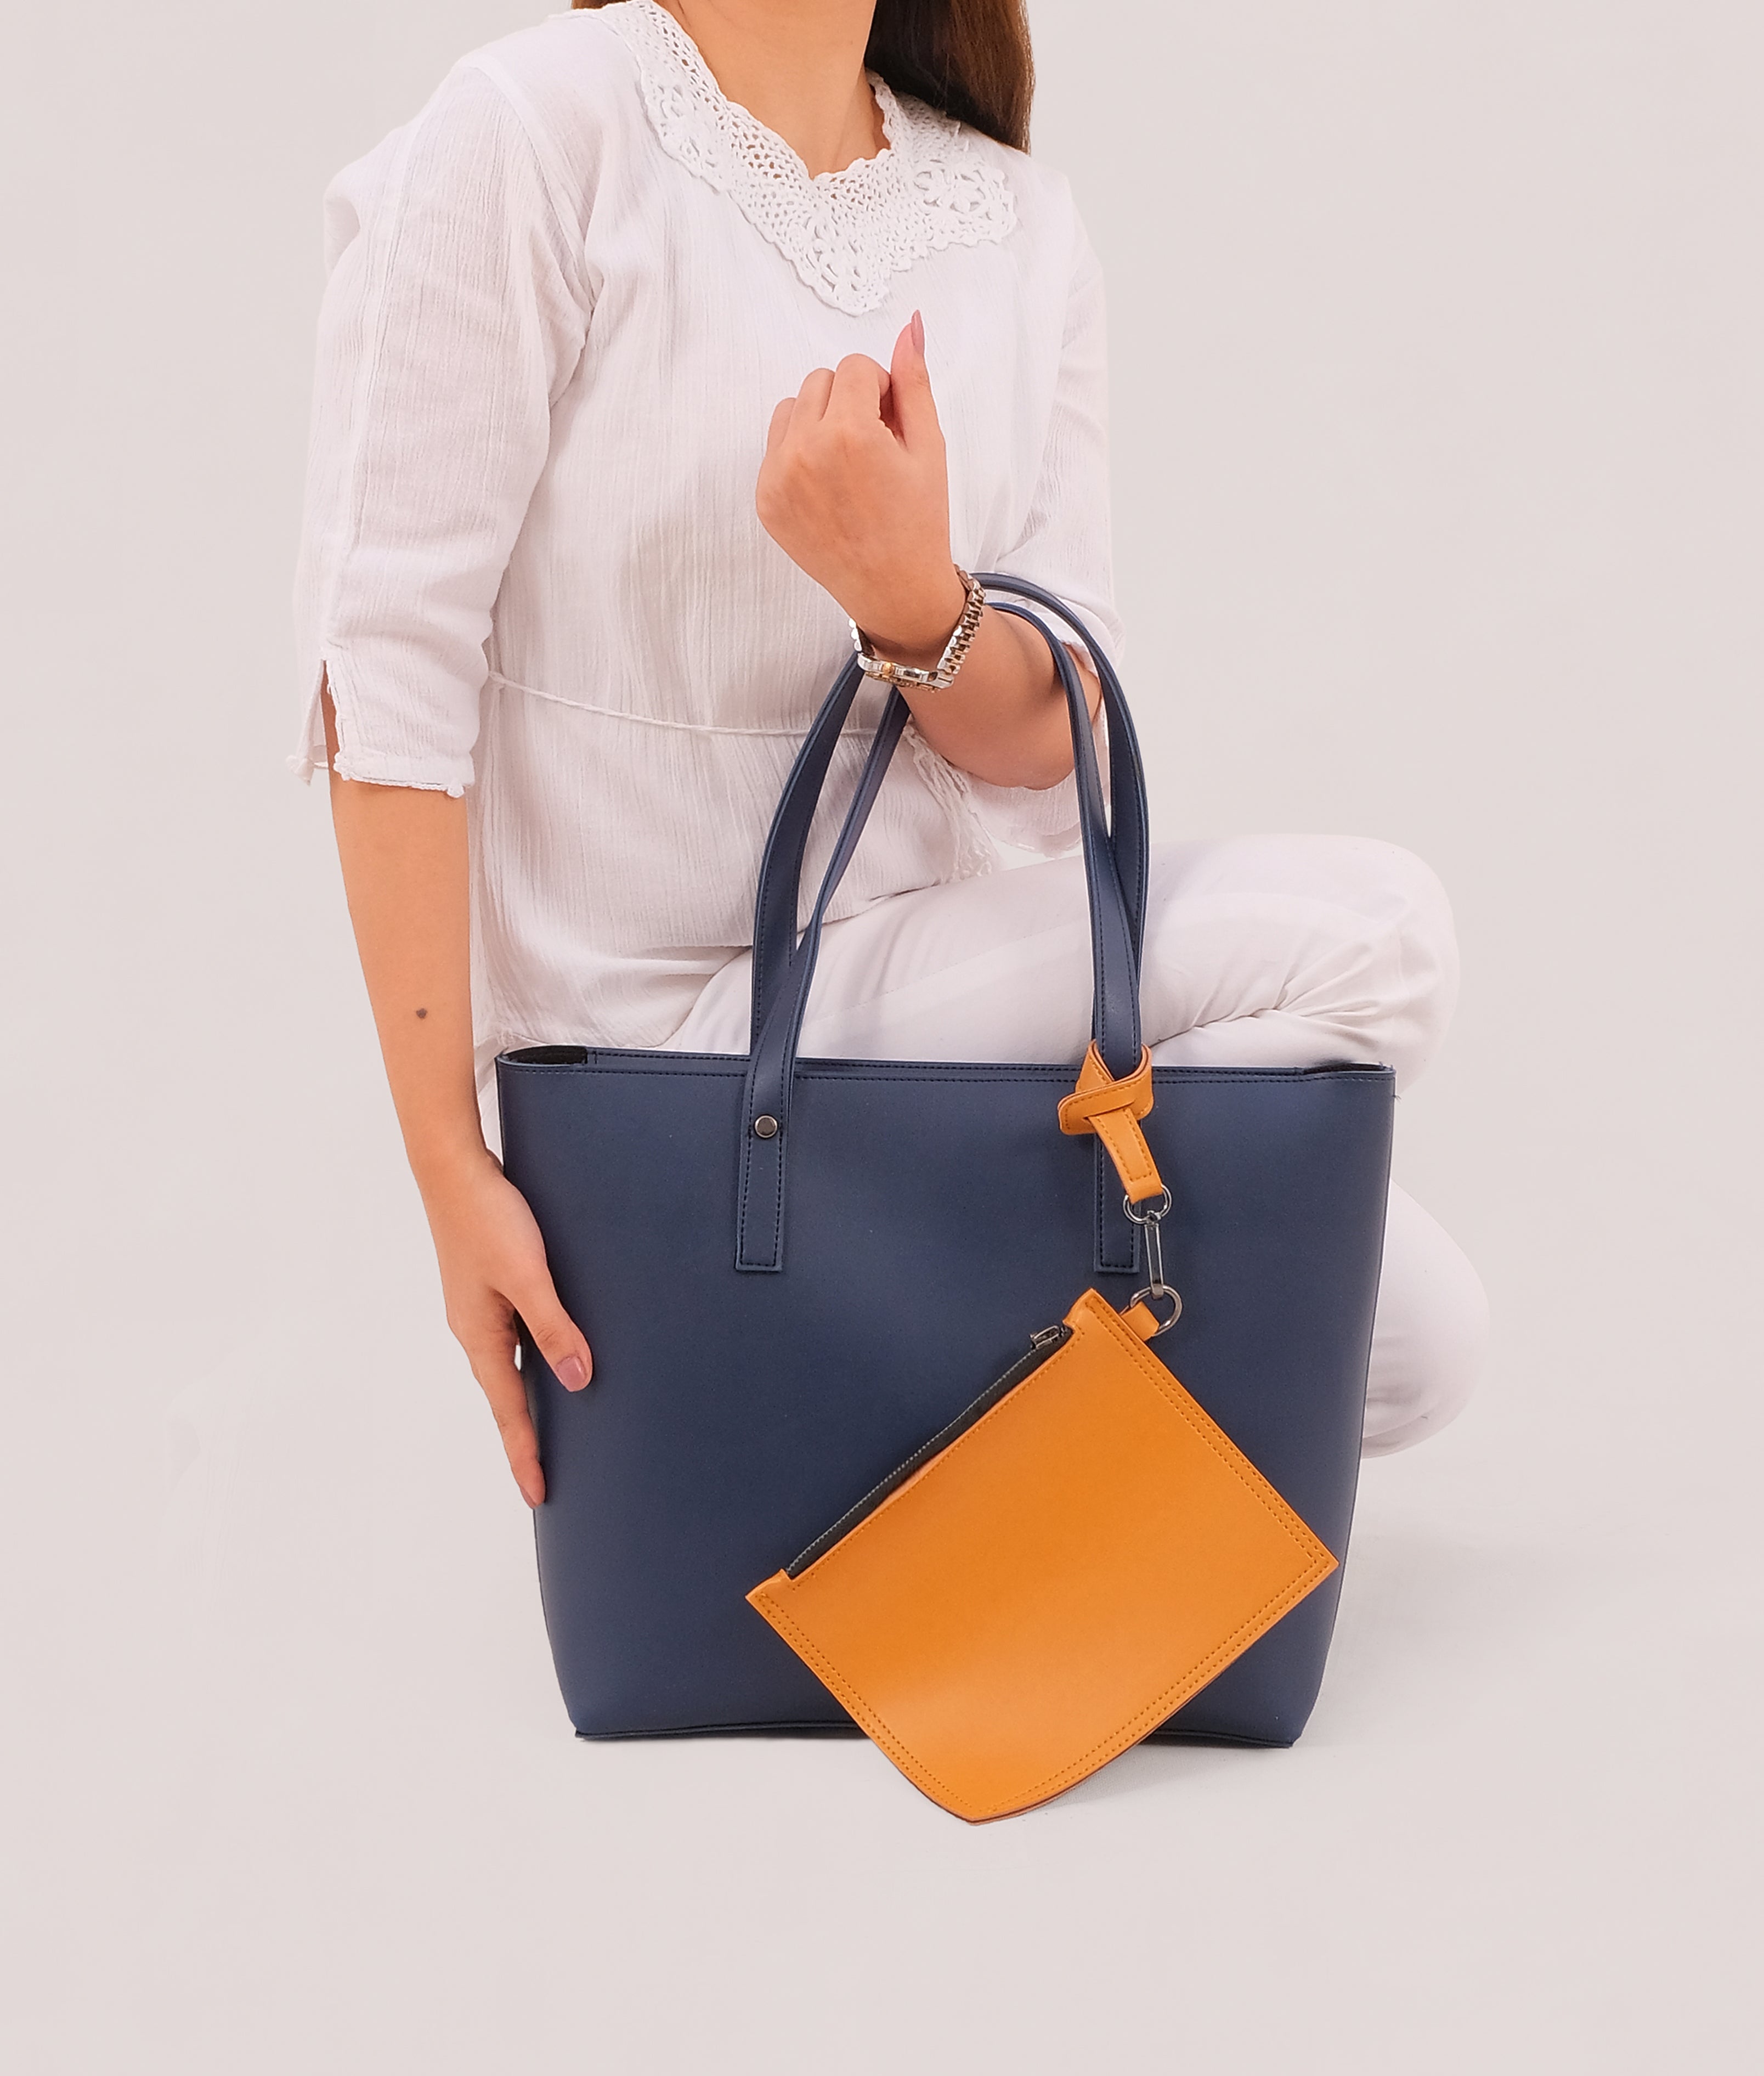 Blue tote bag with detachable pouch